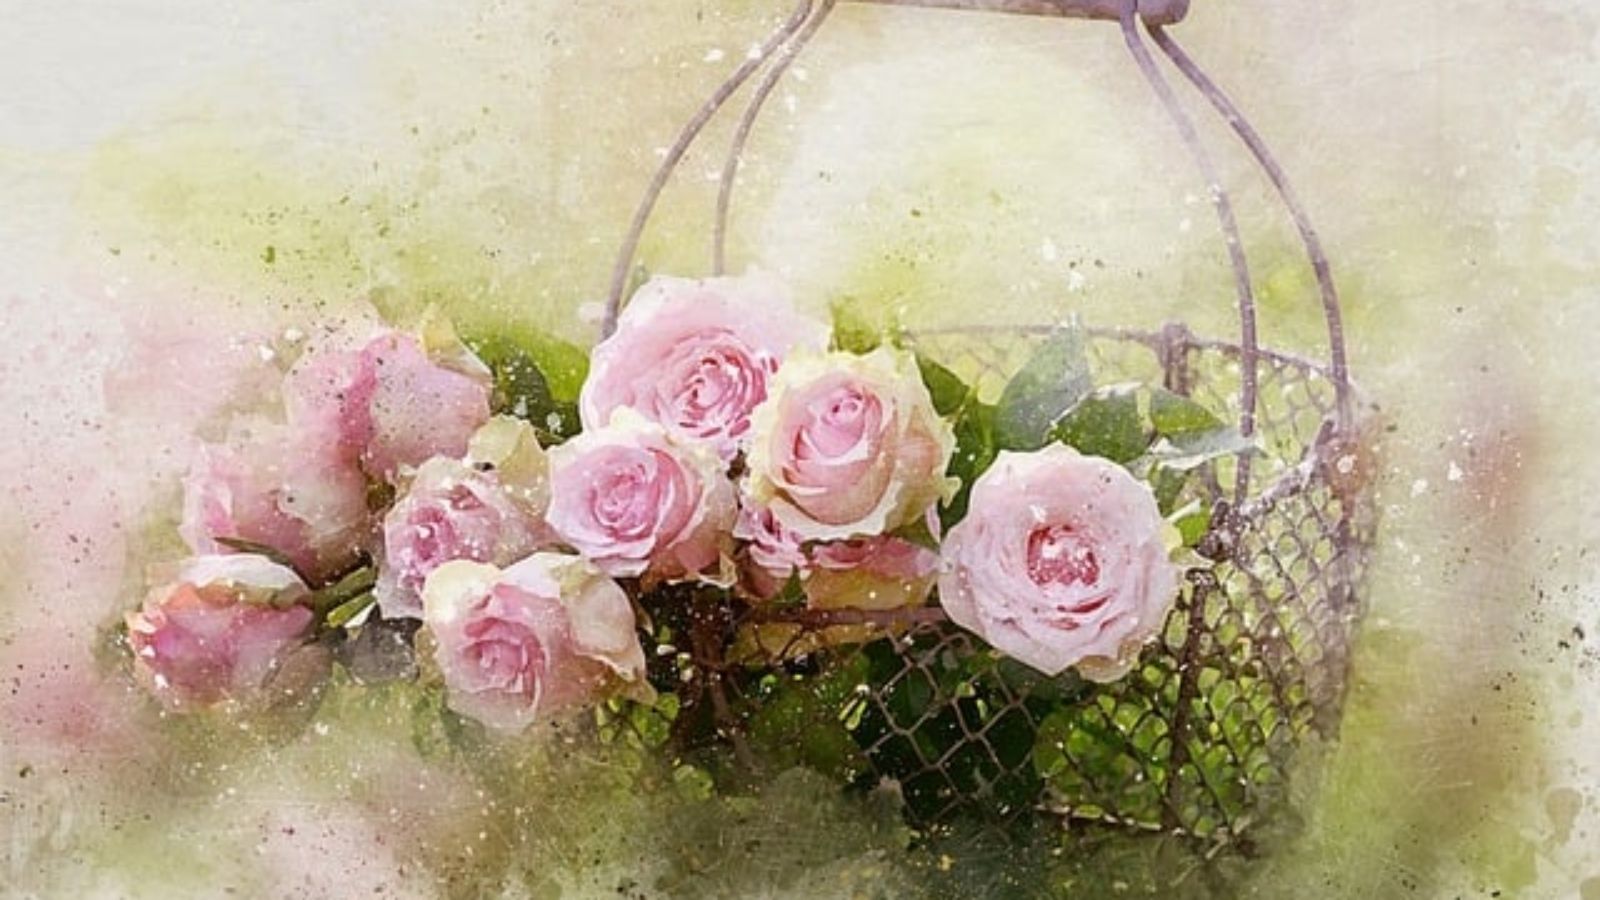 watercolor-roses-and-basket-2144246_640